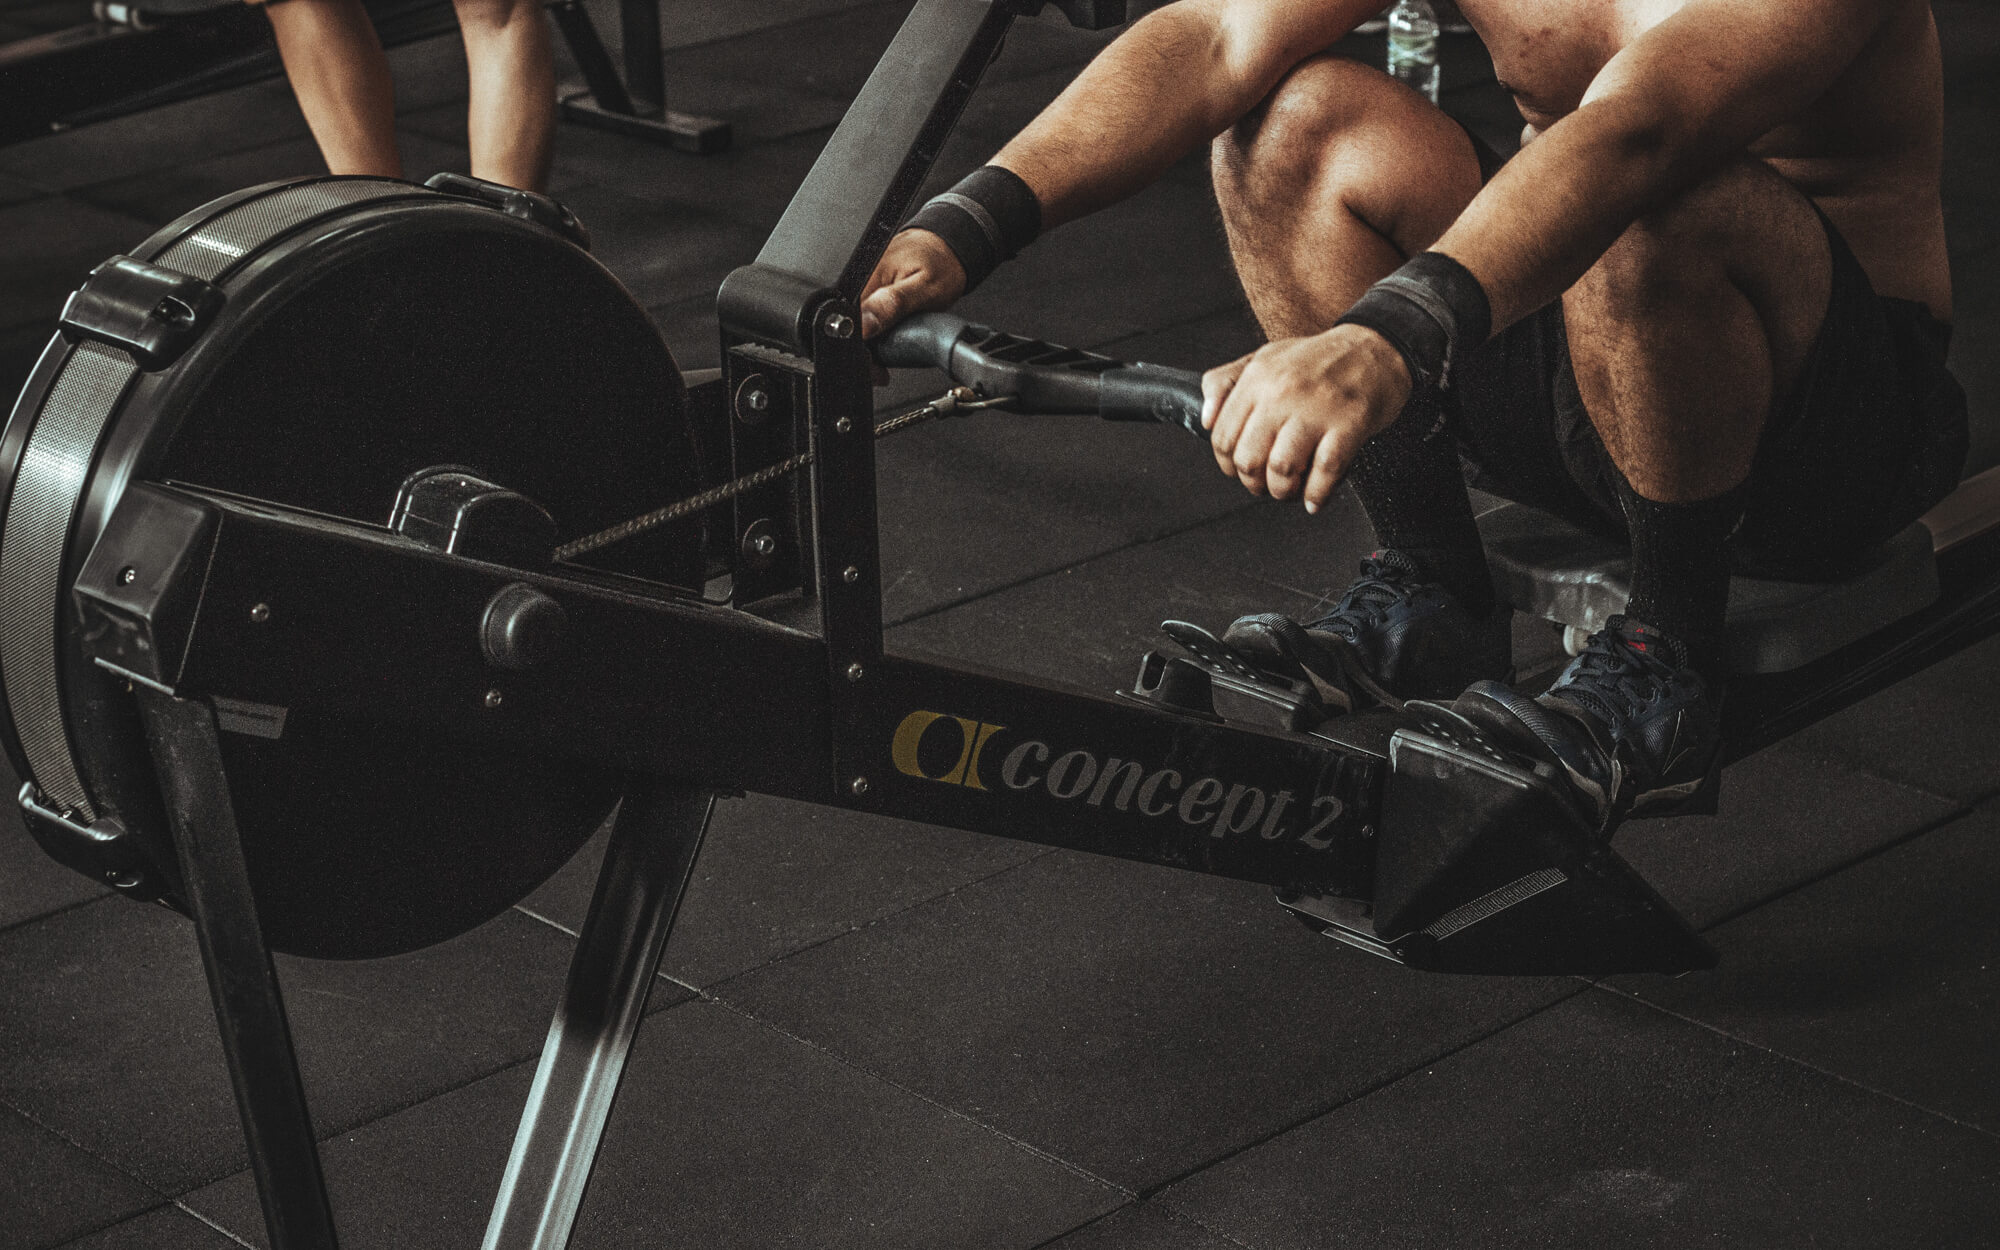 HIIT Workouts on a rower